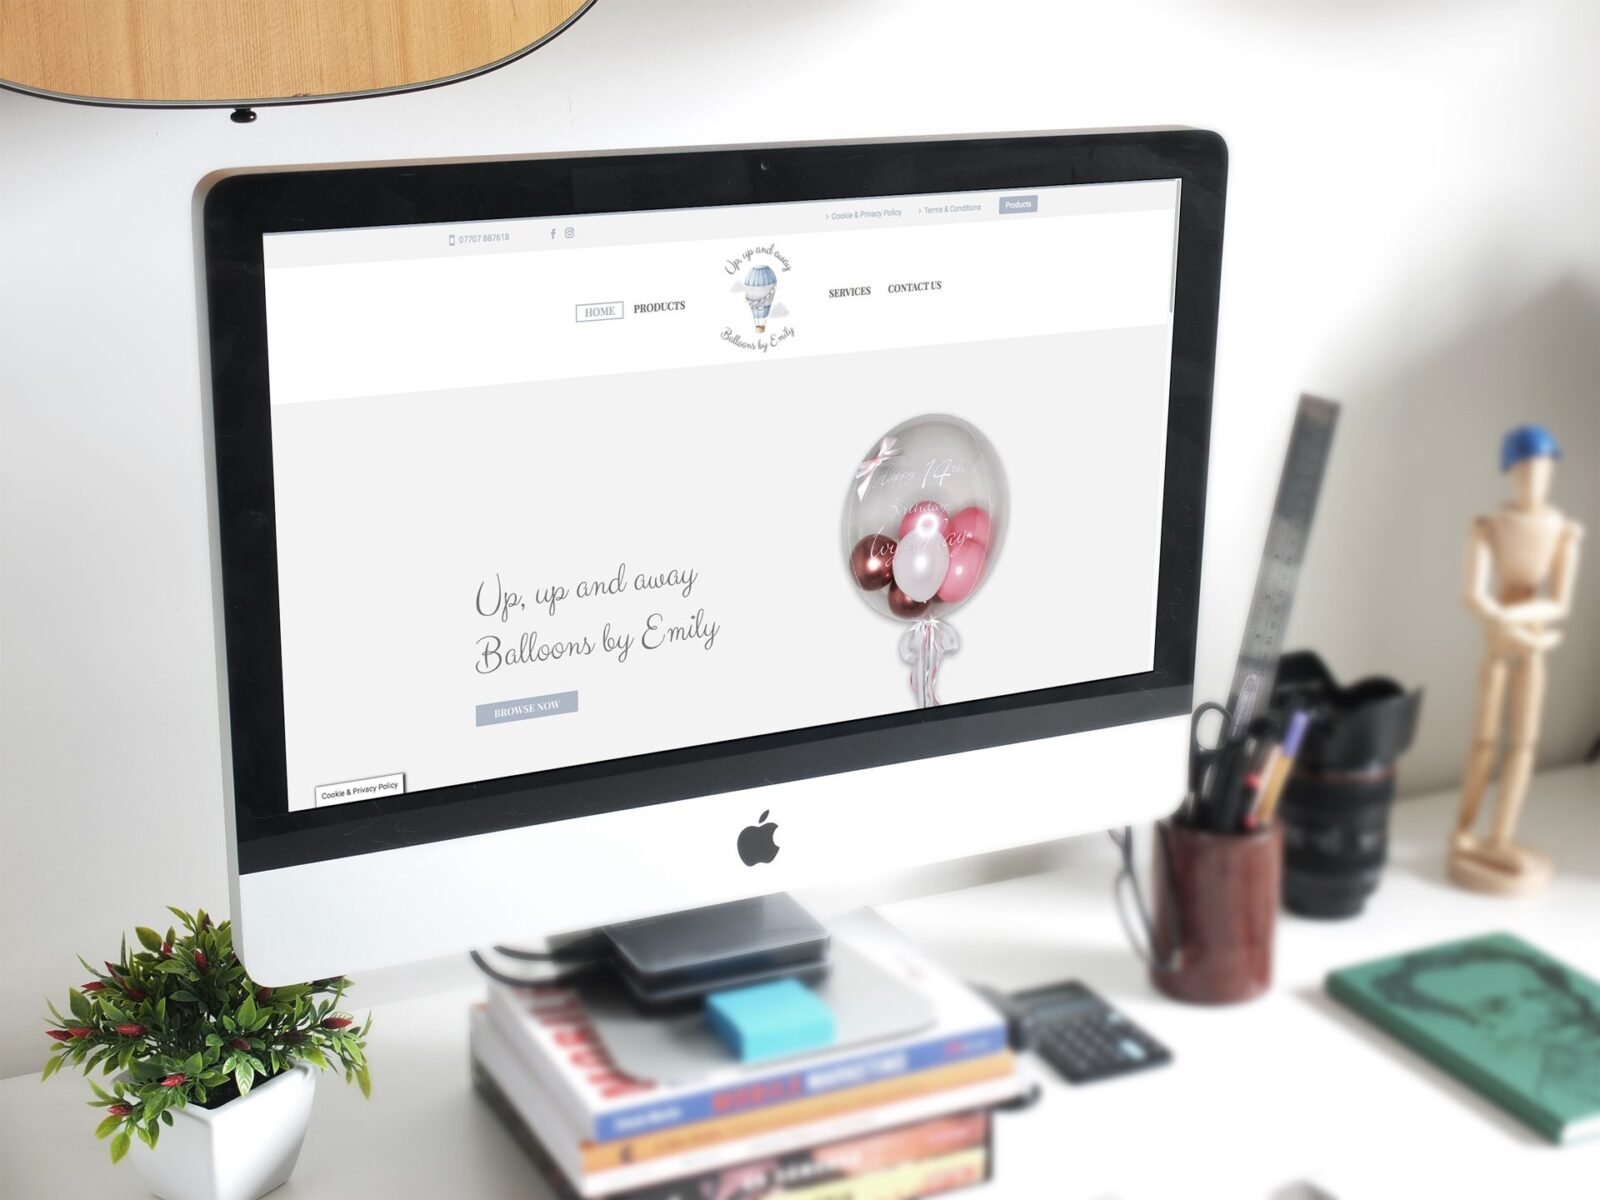 We created this website design for Up, up and away – Balloons by Emily based in Doncaster